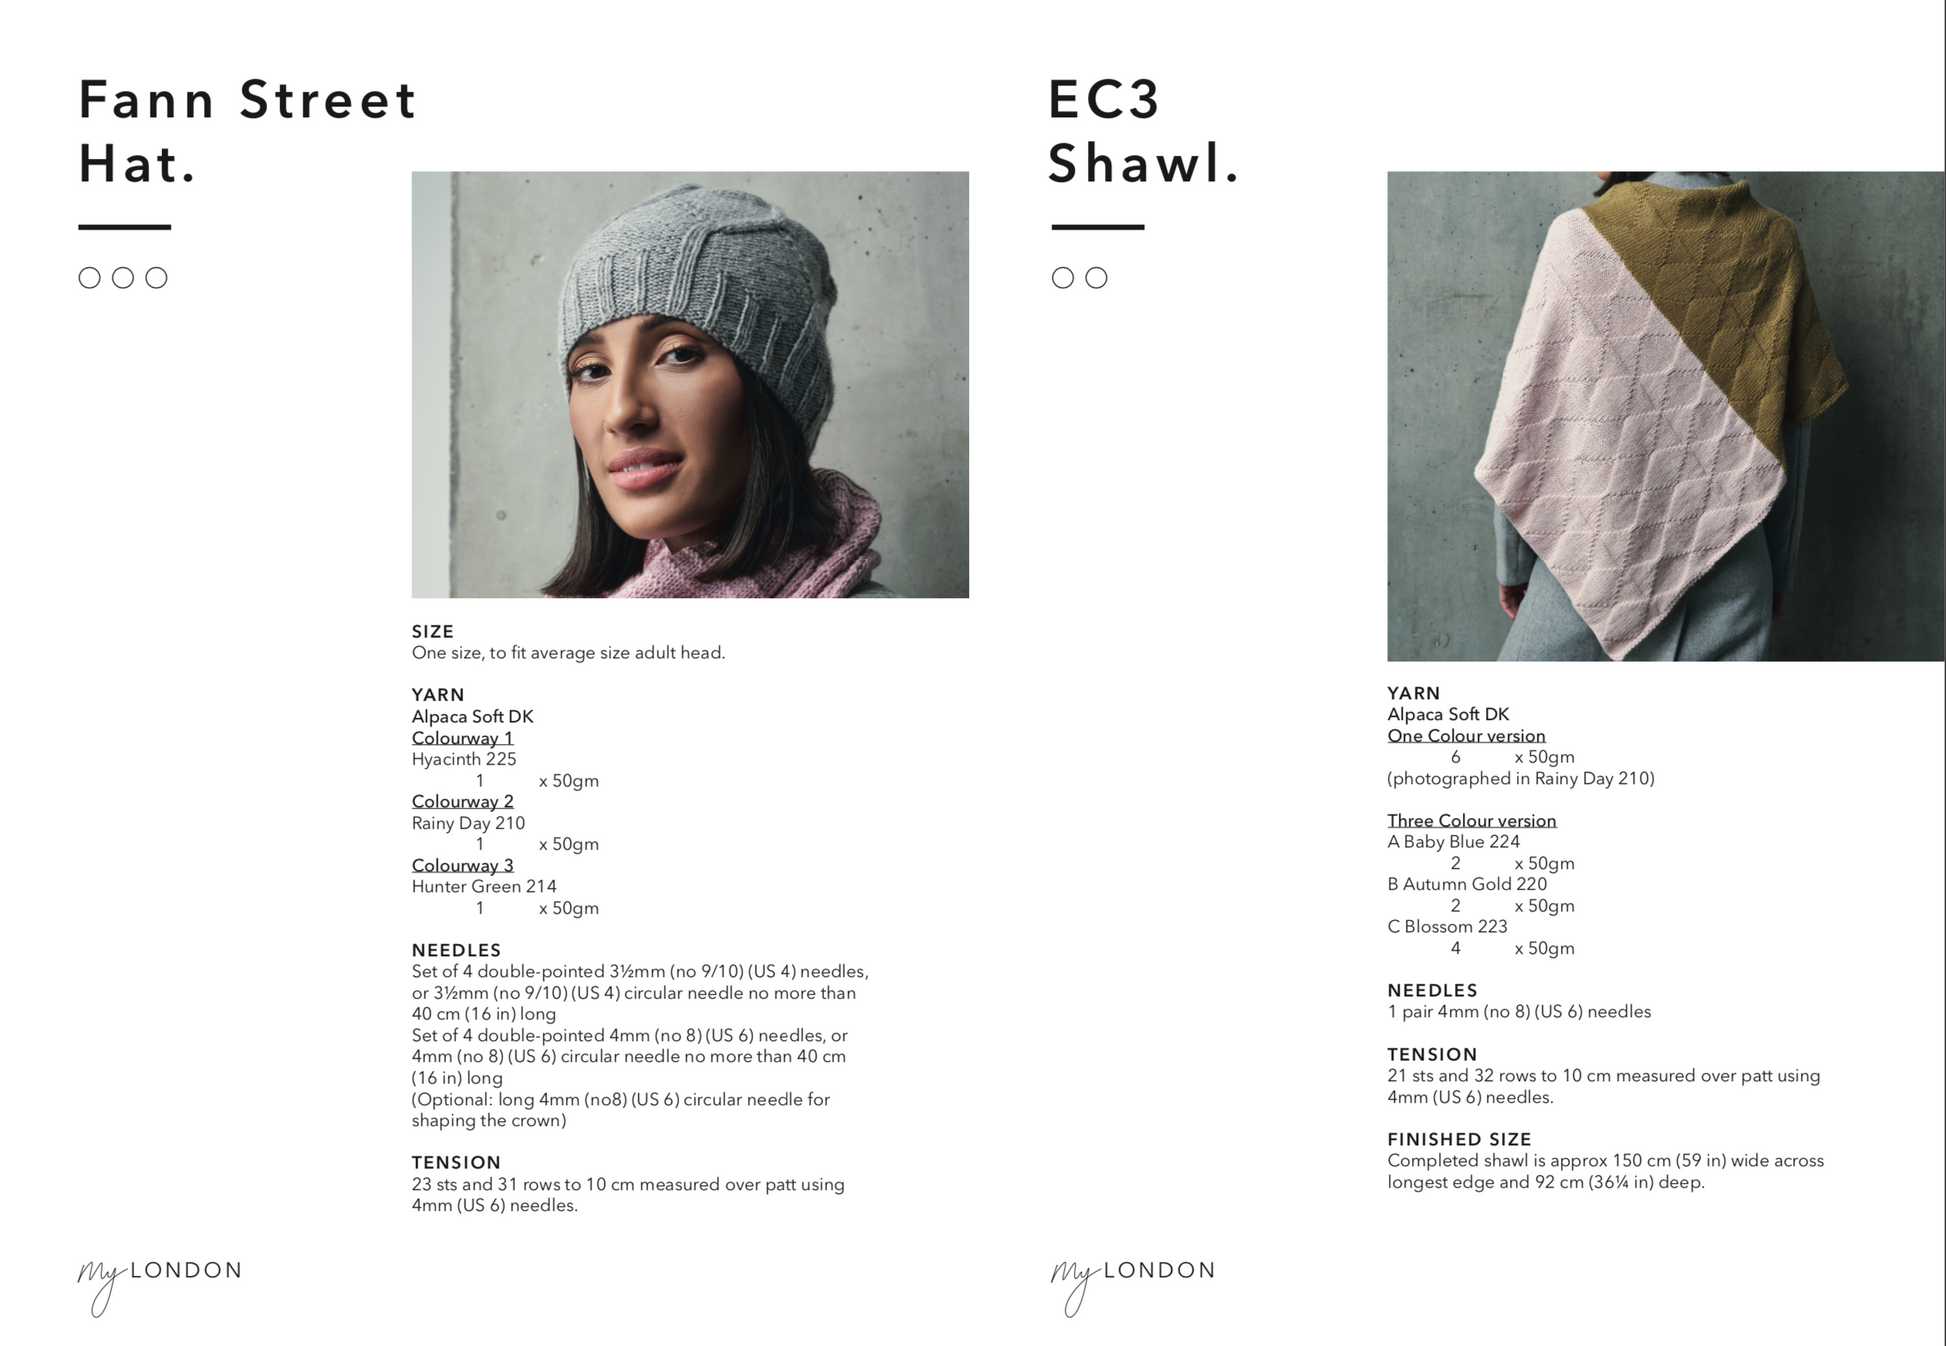 LEFT: Fann Street hat. A light grey hat with line detailing and a ribbed trim.  RIGHT: EC3 shawl. A half and half dusty pink and warm moss shawl with a diagonal pattern.